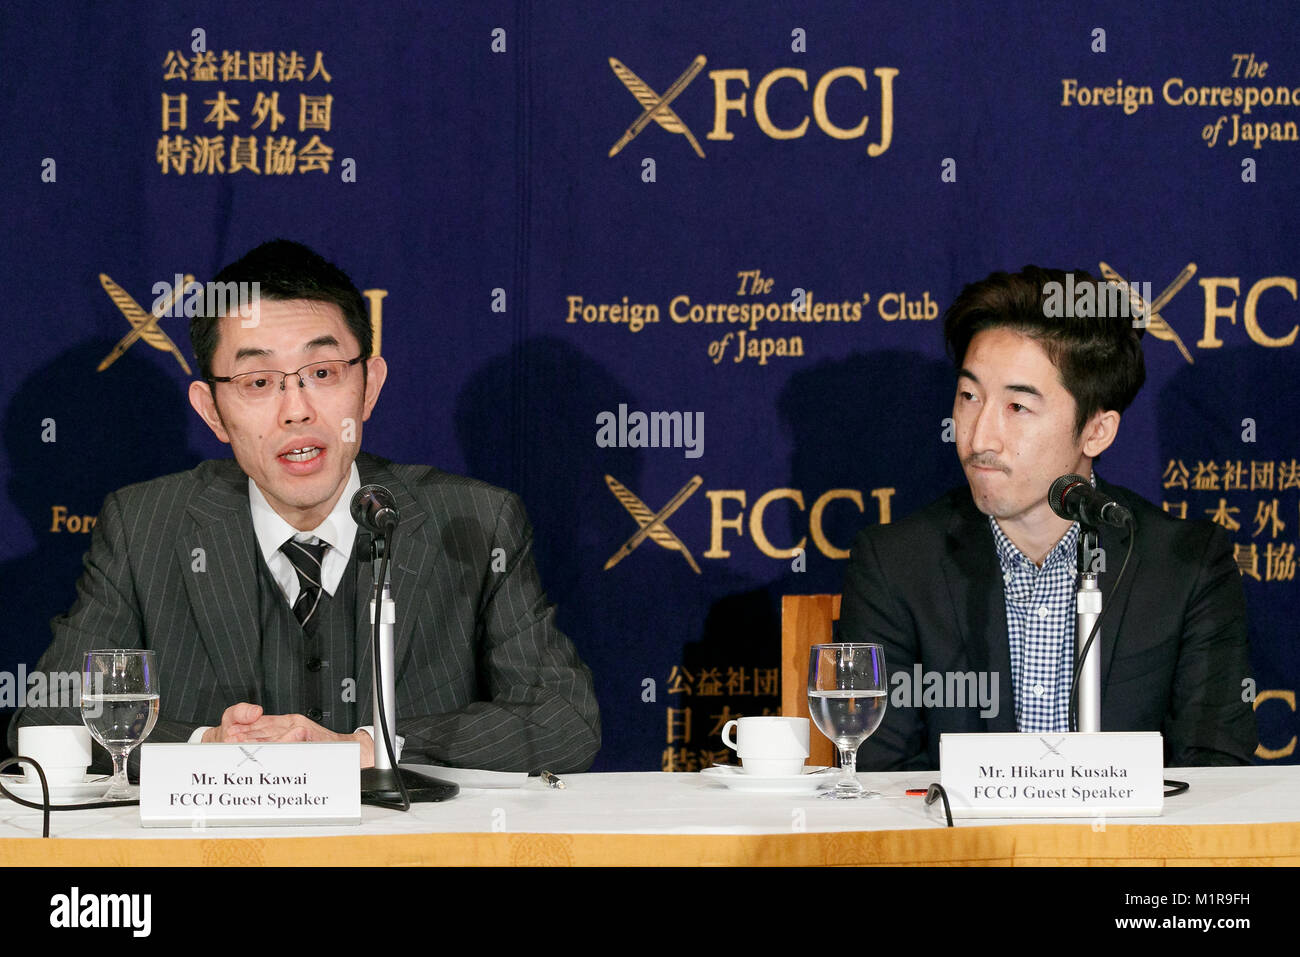 (L to R) Lawyer Ken Kawai and Hikaru Kusaka Co-founder of BLOCKHIVE, speak during a news conference at the Foreign Correspondents' Club of Japan (FCCJ) on February 1, 2018, Tokyo, Japan. Kawai and Kusaka spoke to members of the foreign press their opinions about why Japan decided to recognize financial currencies such as Bitcoin and other cryptocurrencies as legitimate payment methods in 2017. Nevertheless, the vulnerability of the cryptocurrencies has been exposed after Tokyo's Coincheck Inc. admitted losing 58 billion yen ($533 million) in NEM cryptocurrency tokens from roughly 260,000 custo Stock Photo